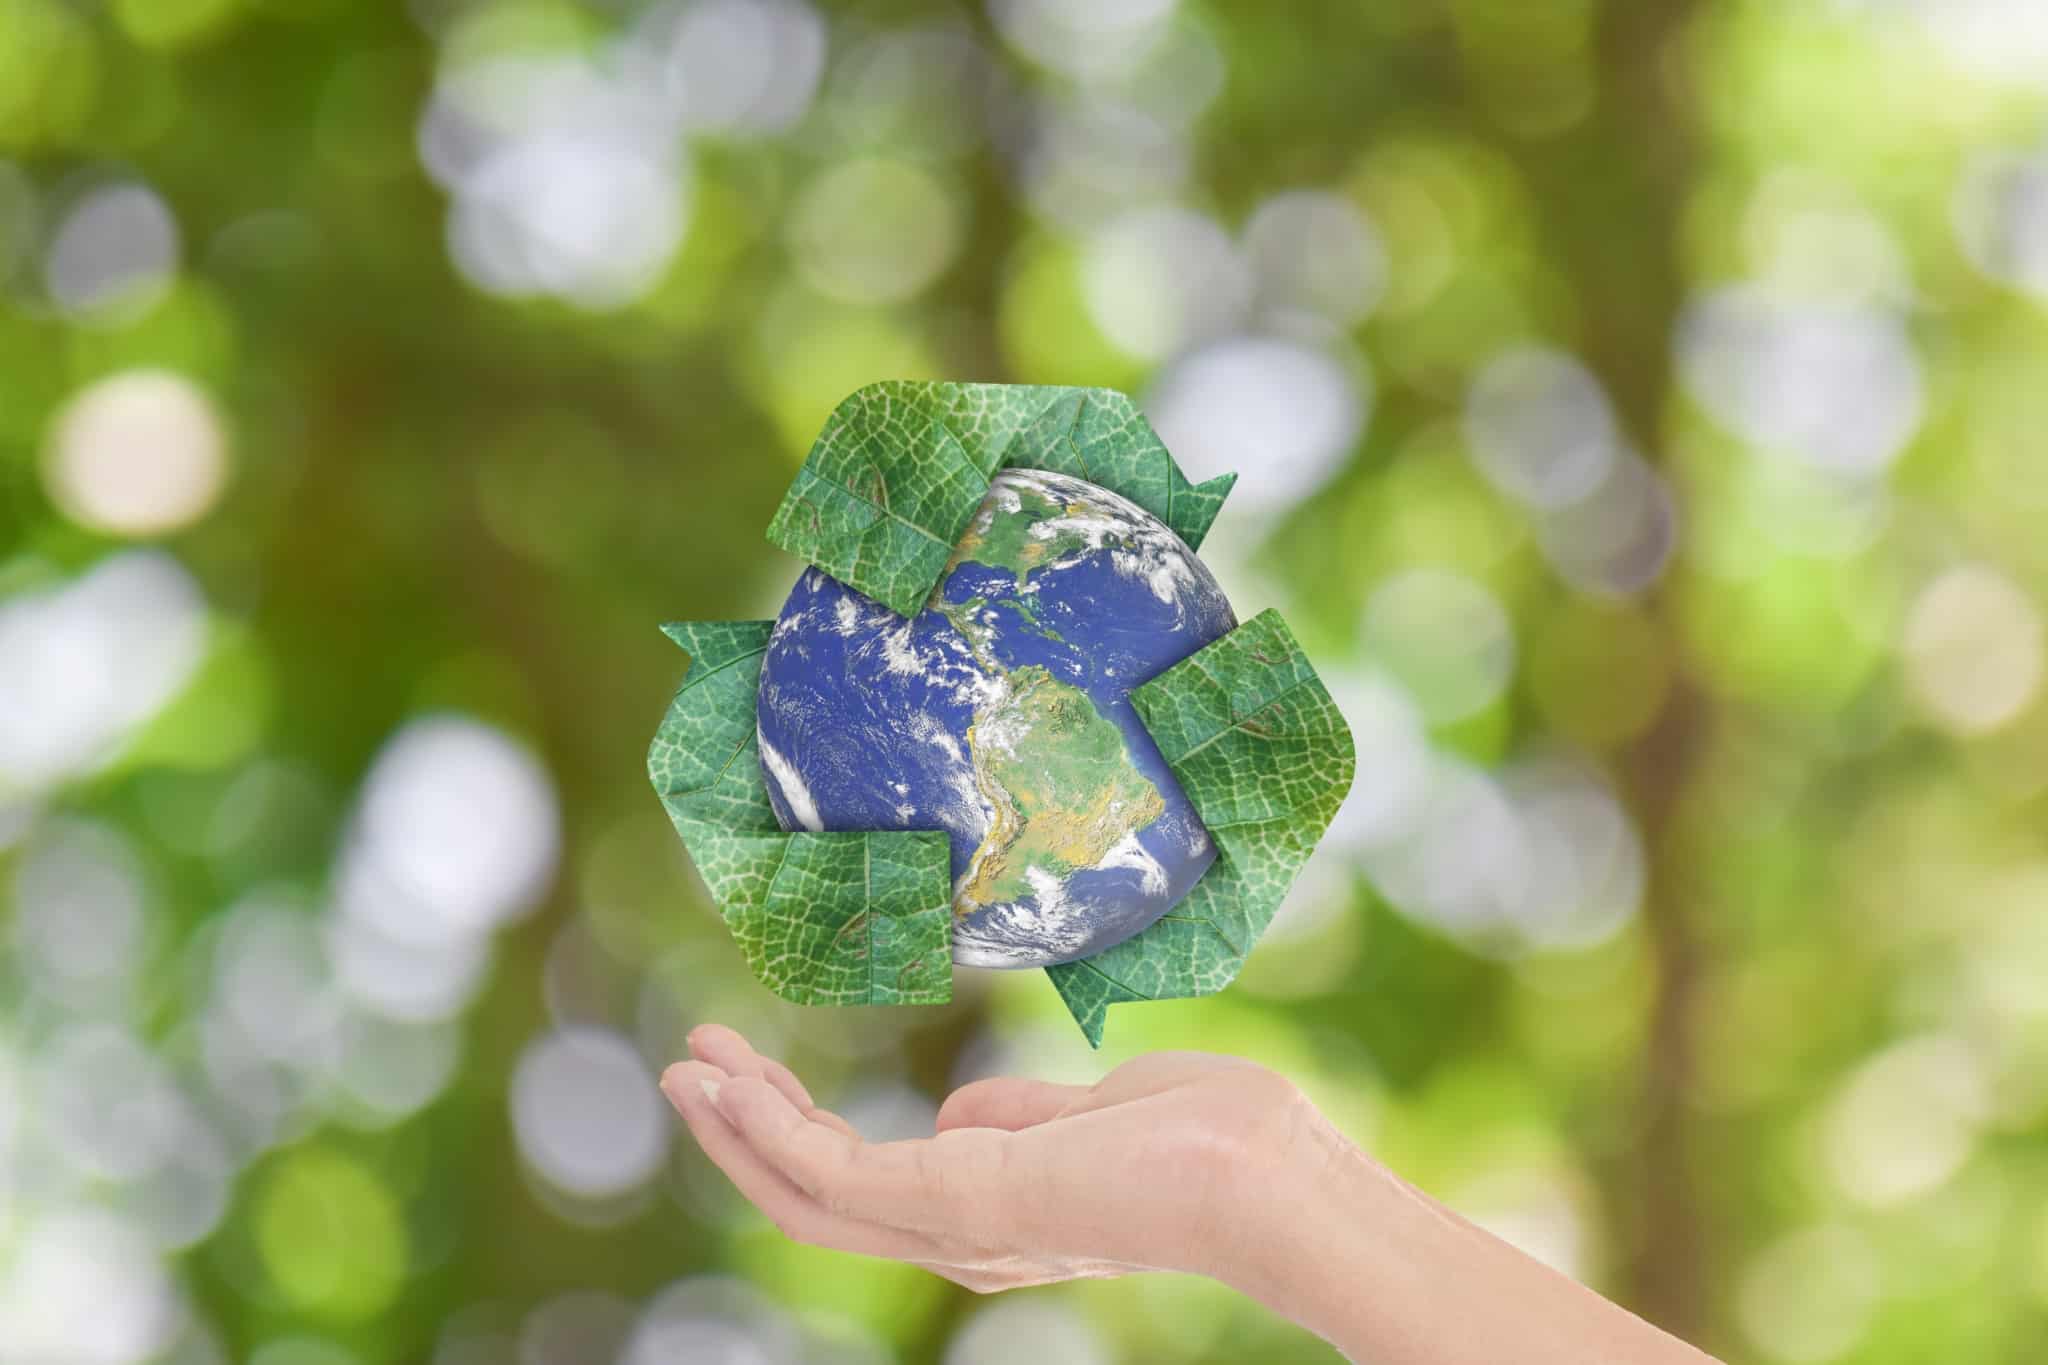 the world with the green recycling symbol around it and a hand underneath it as if to hold it